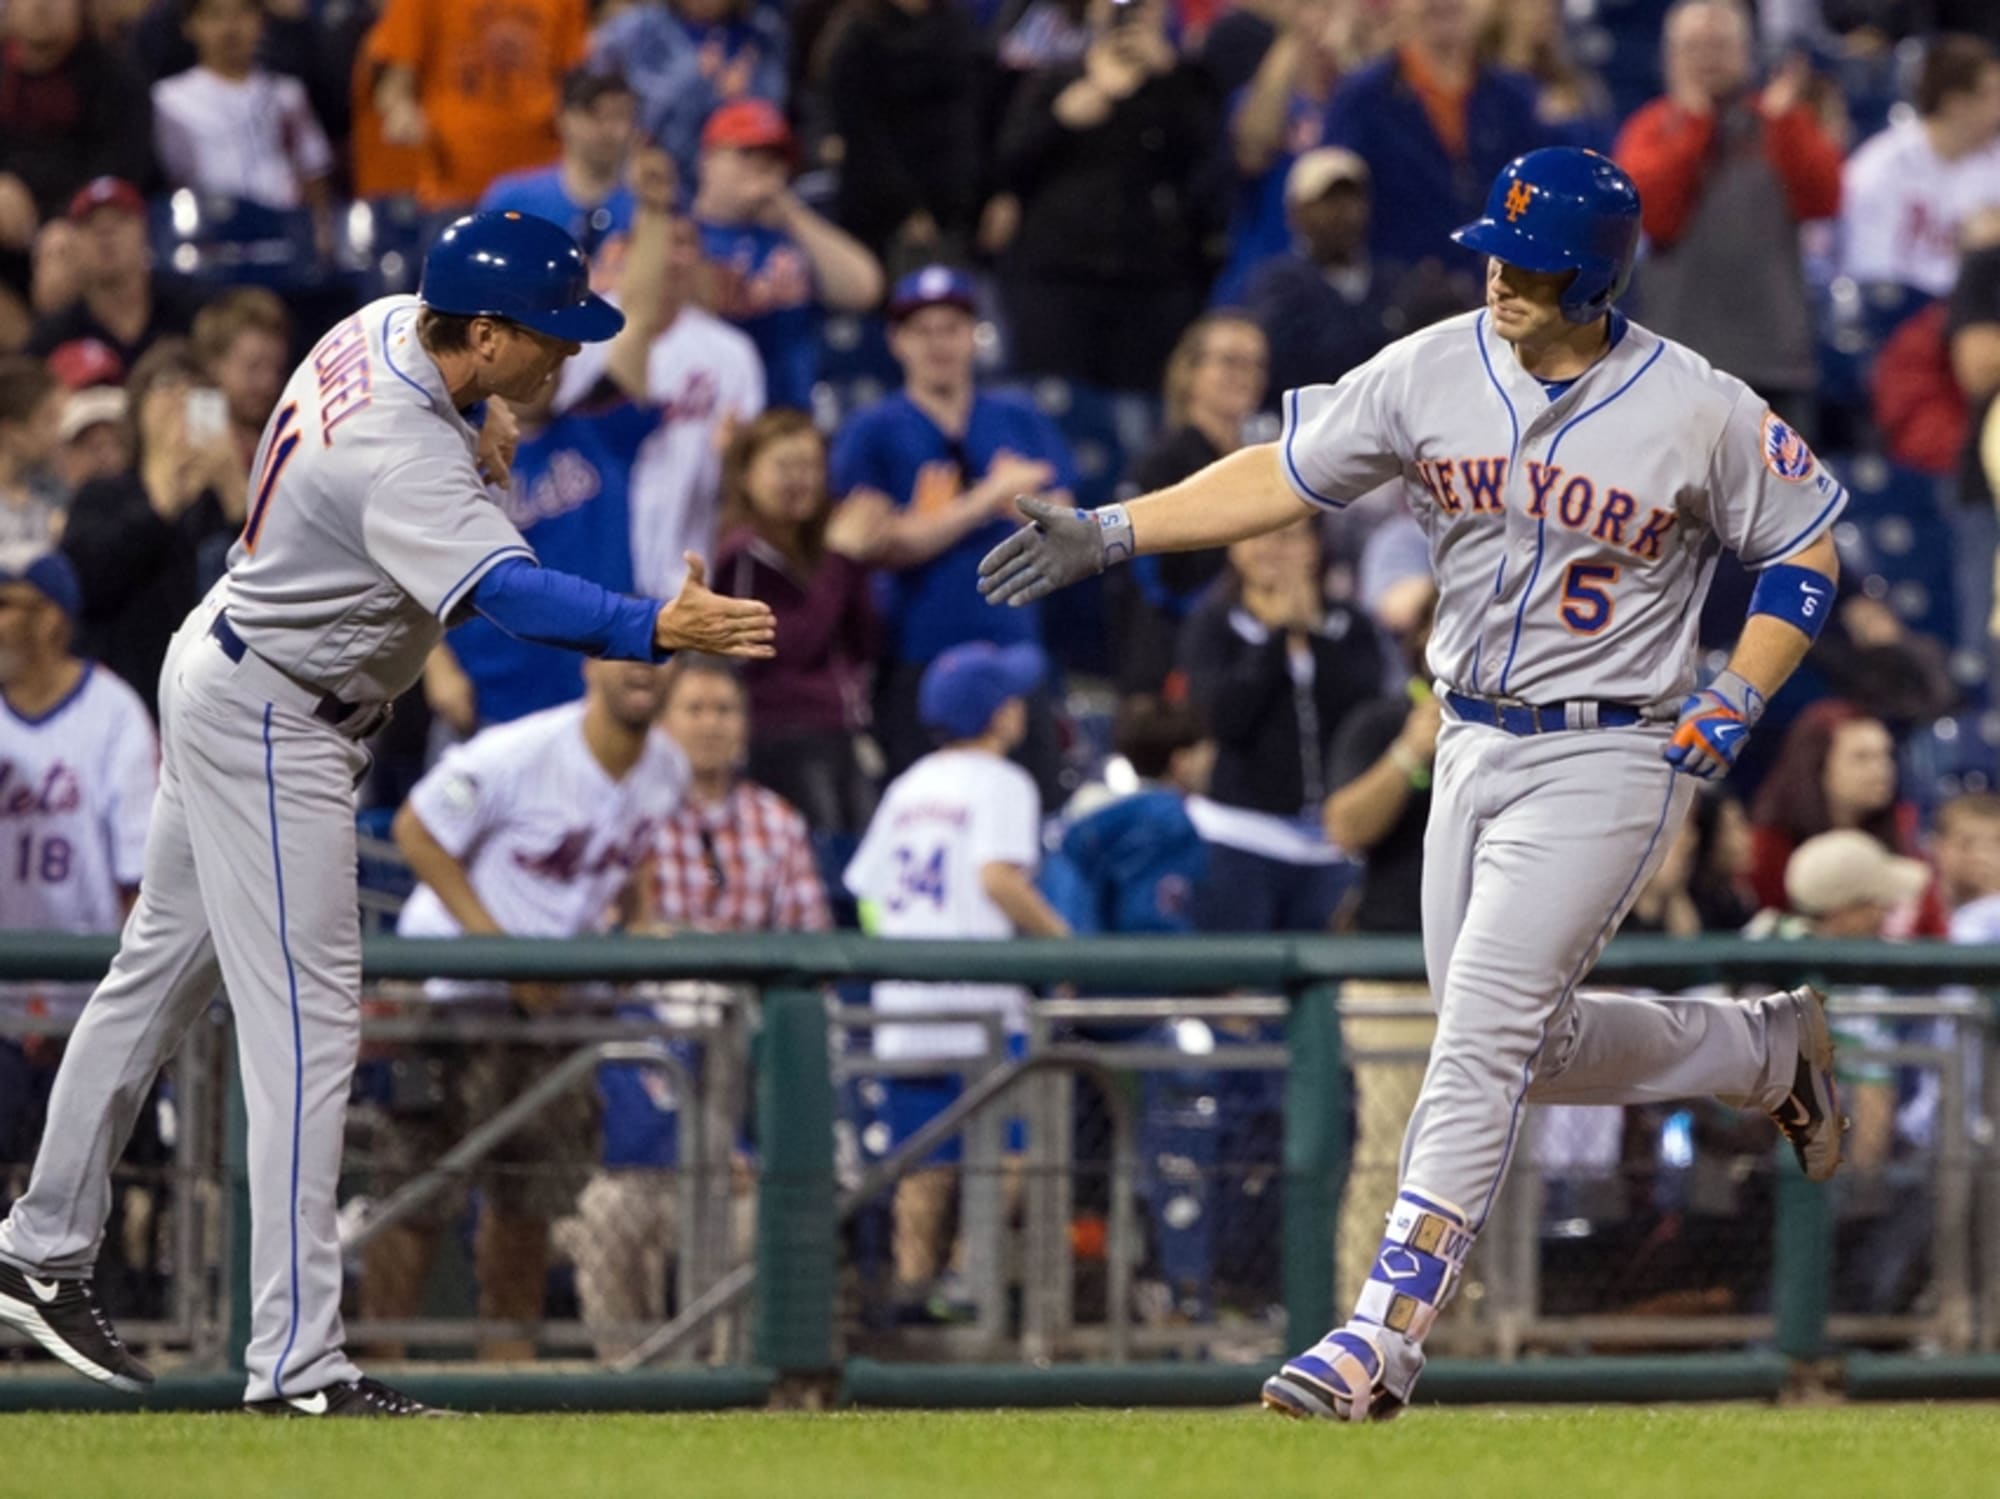 David Wright drives in four runs as Mets take Game 3 of World Series